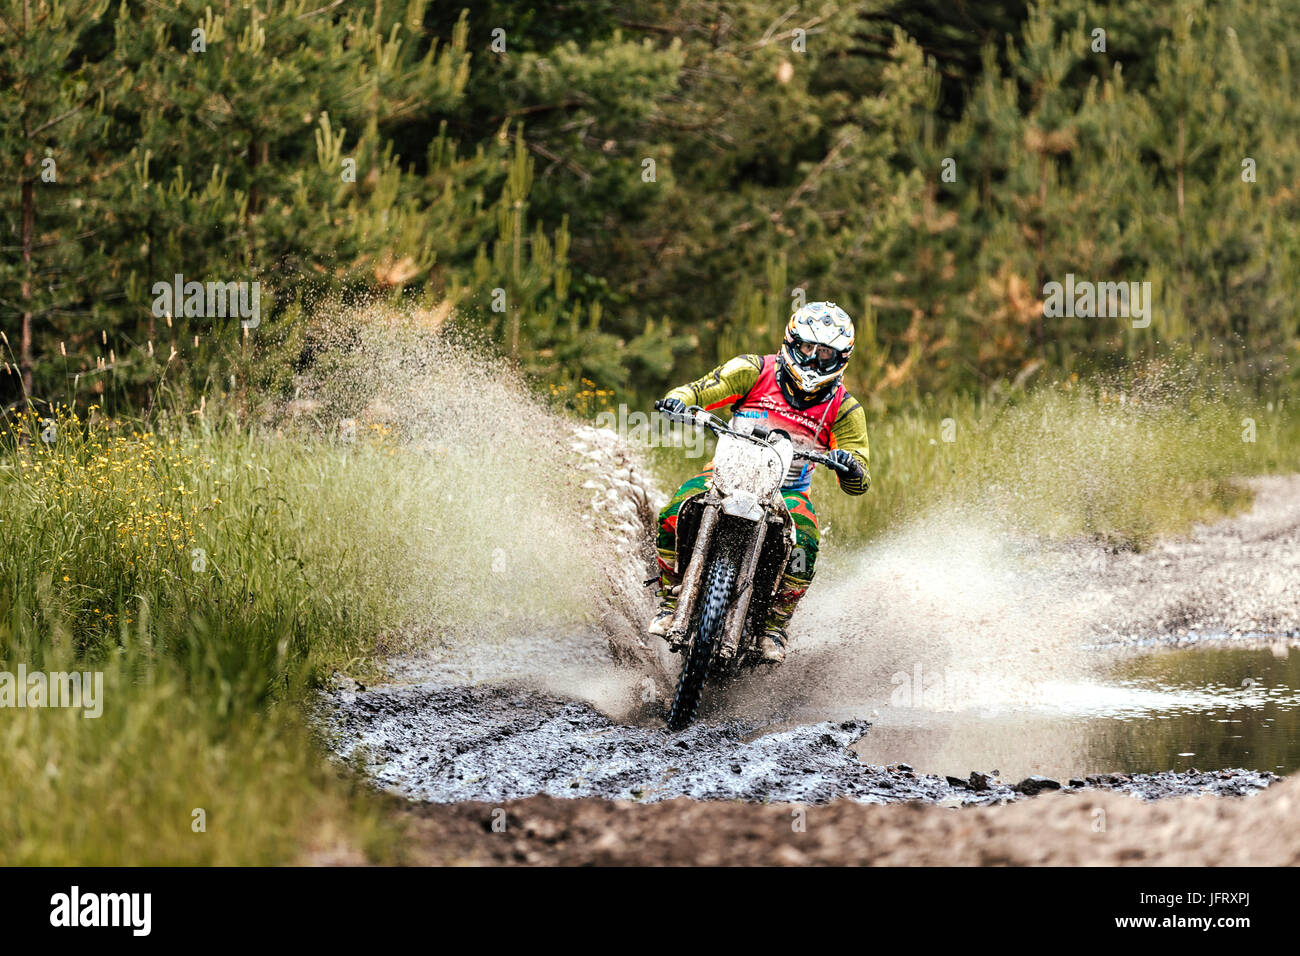 enduro athlete on motorcycle crosses a water puddle during Ural Cup in Enduro Stock Photo